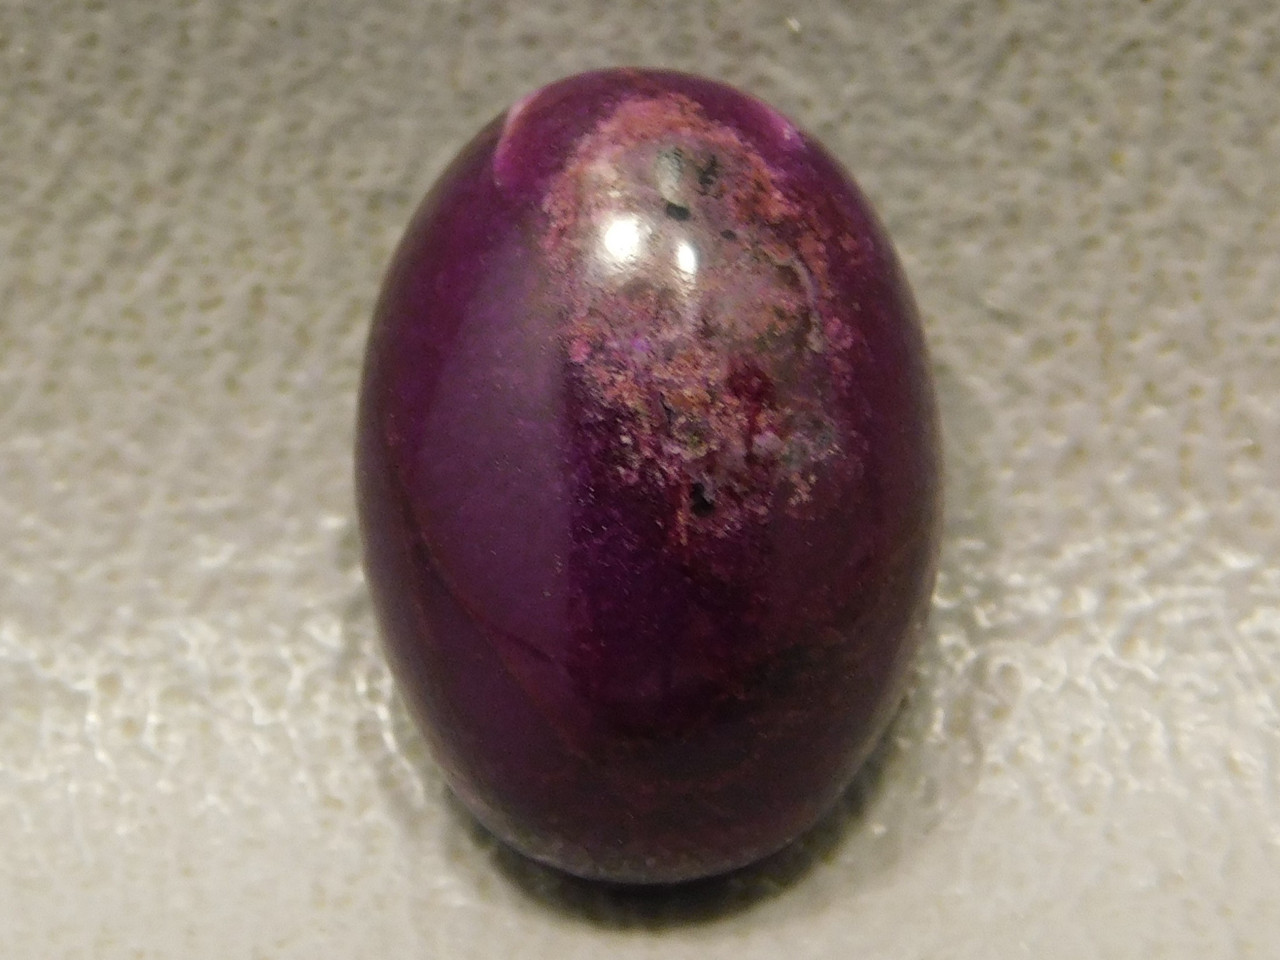 Sugilite Cabochon Purple Small Oval 14.5 mm by 10 mm Stone #33